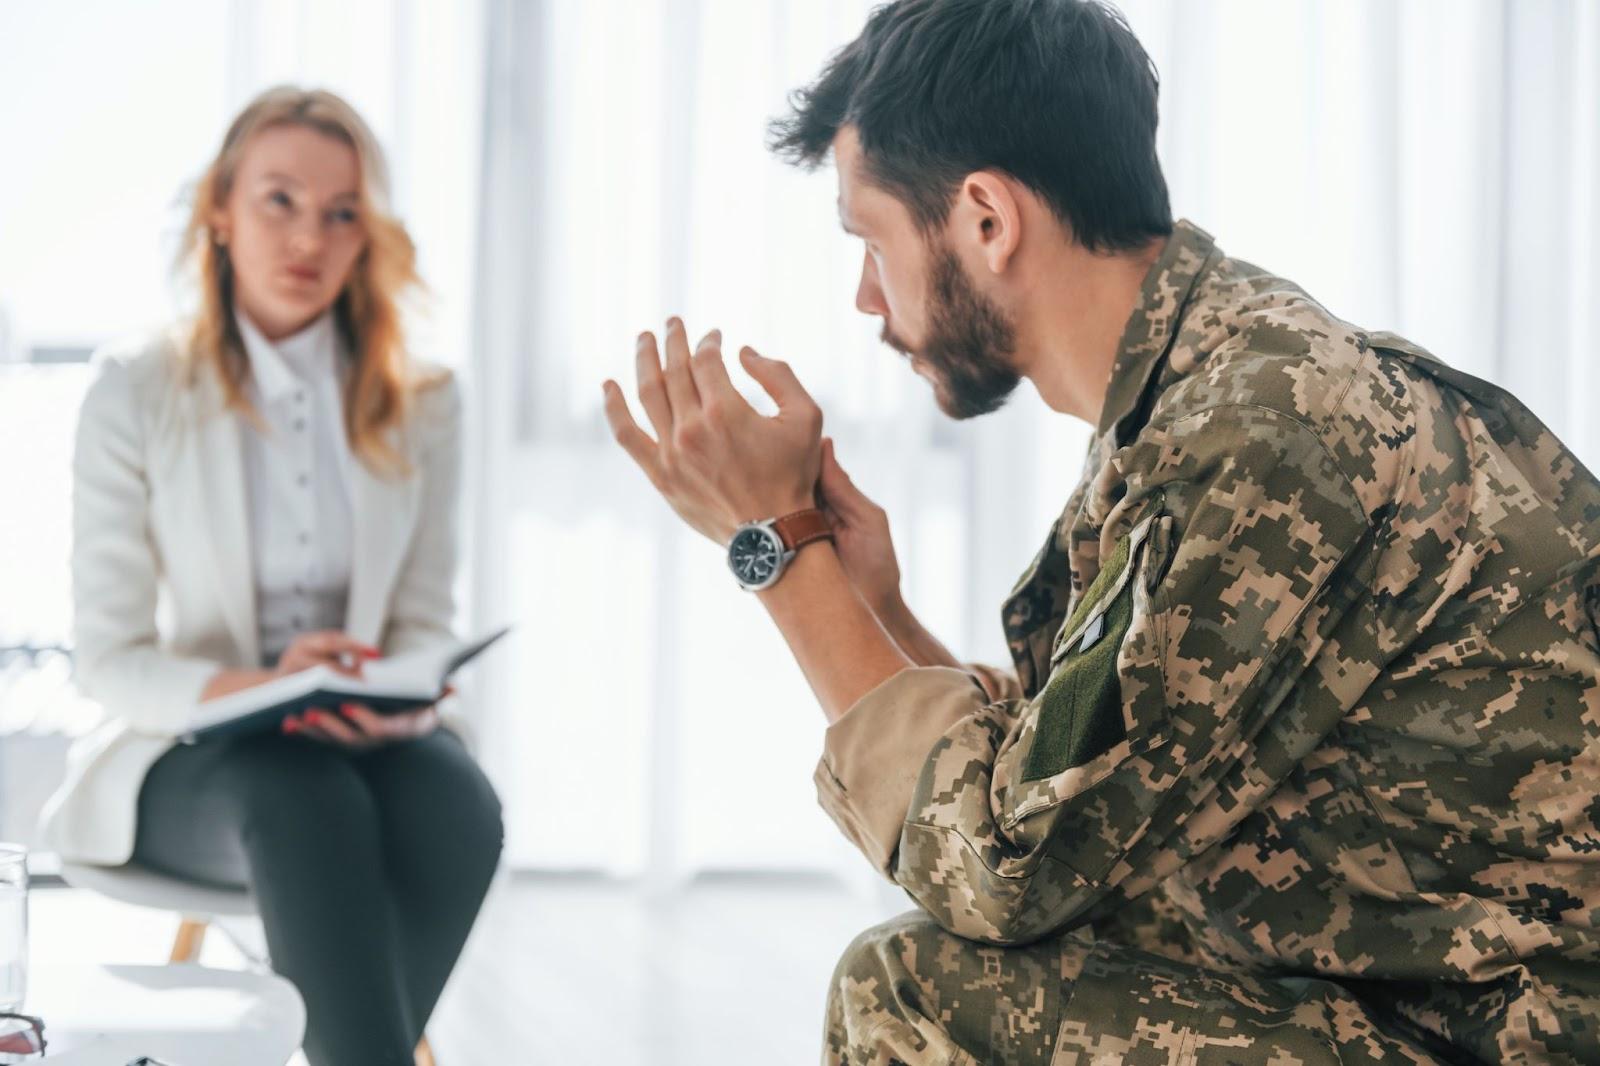 A soldier in camouflage uniform talks with a military divorce lawyer taking notes in a bright, modern office.